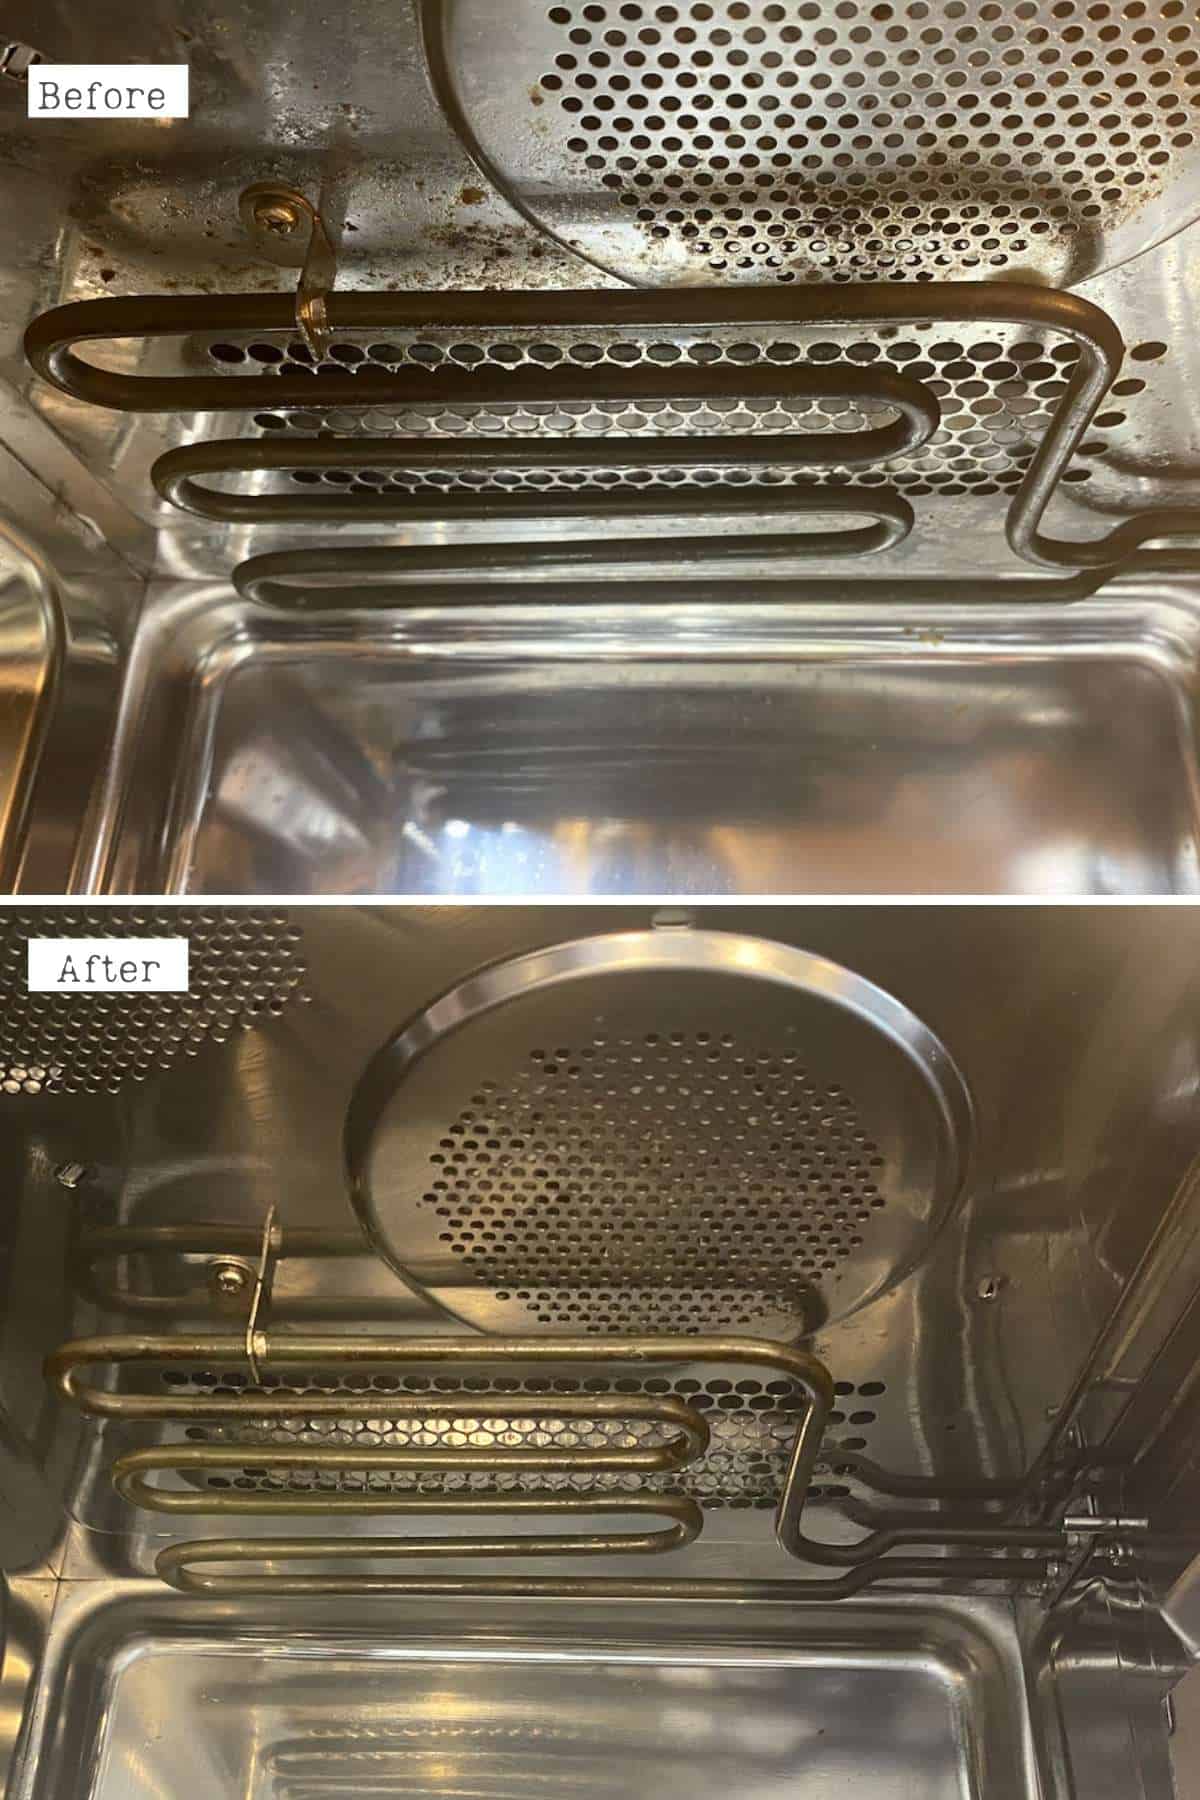 Before and after cleaning a microwave